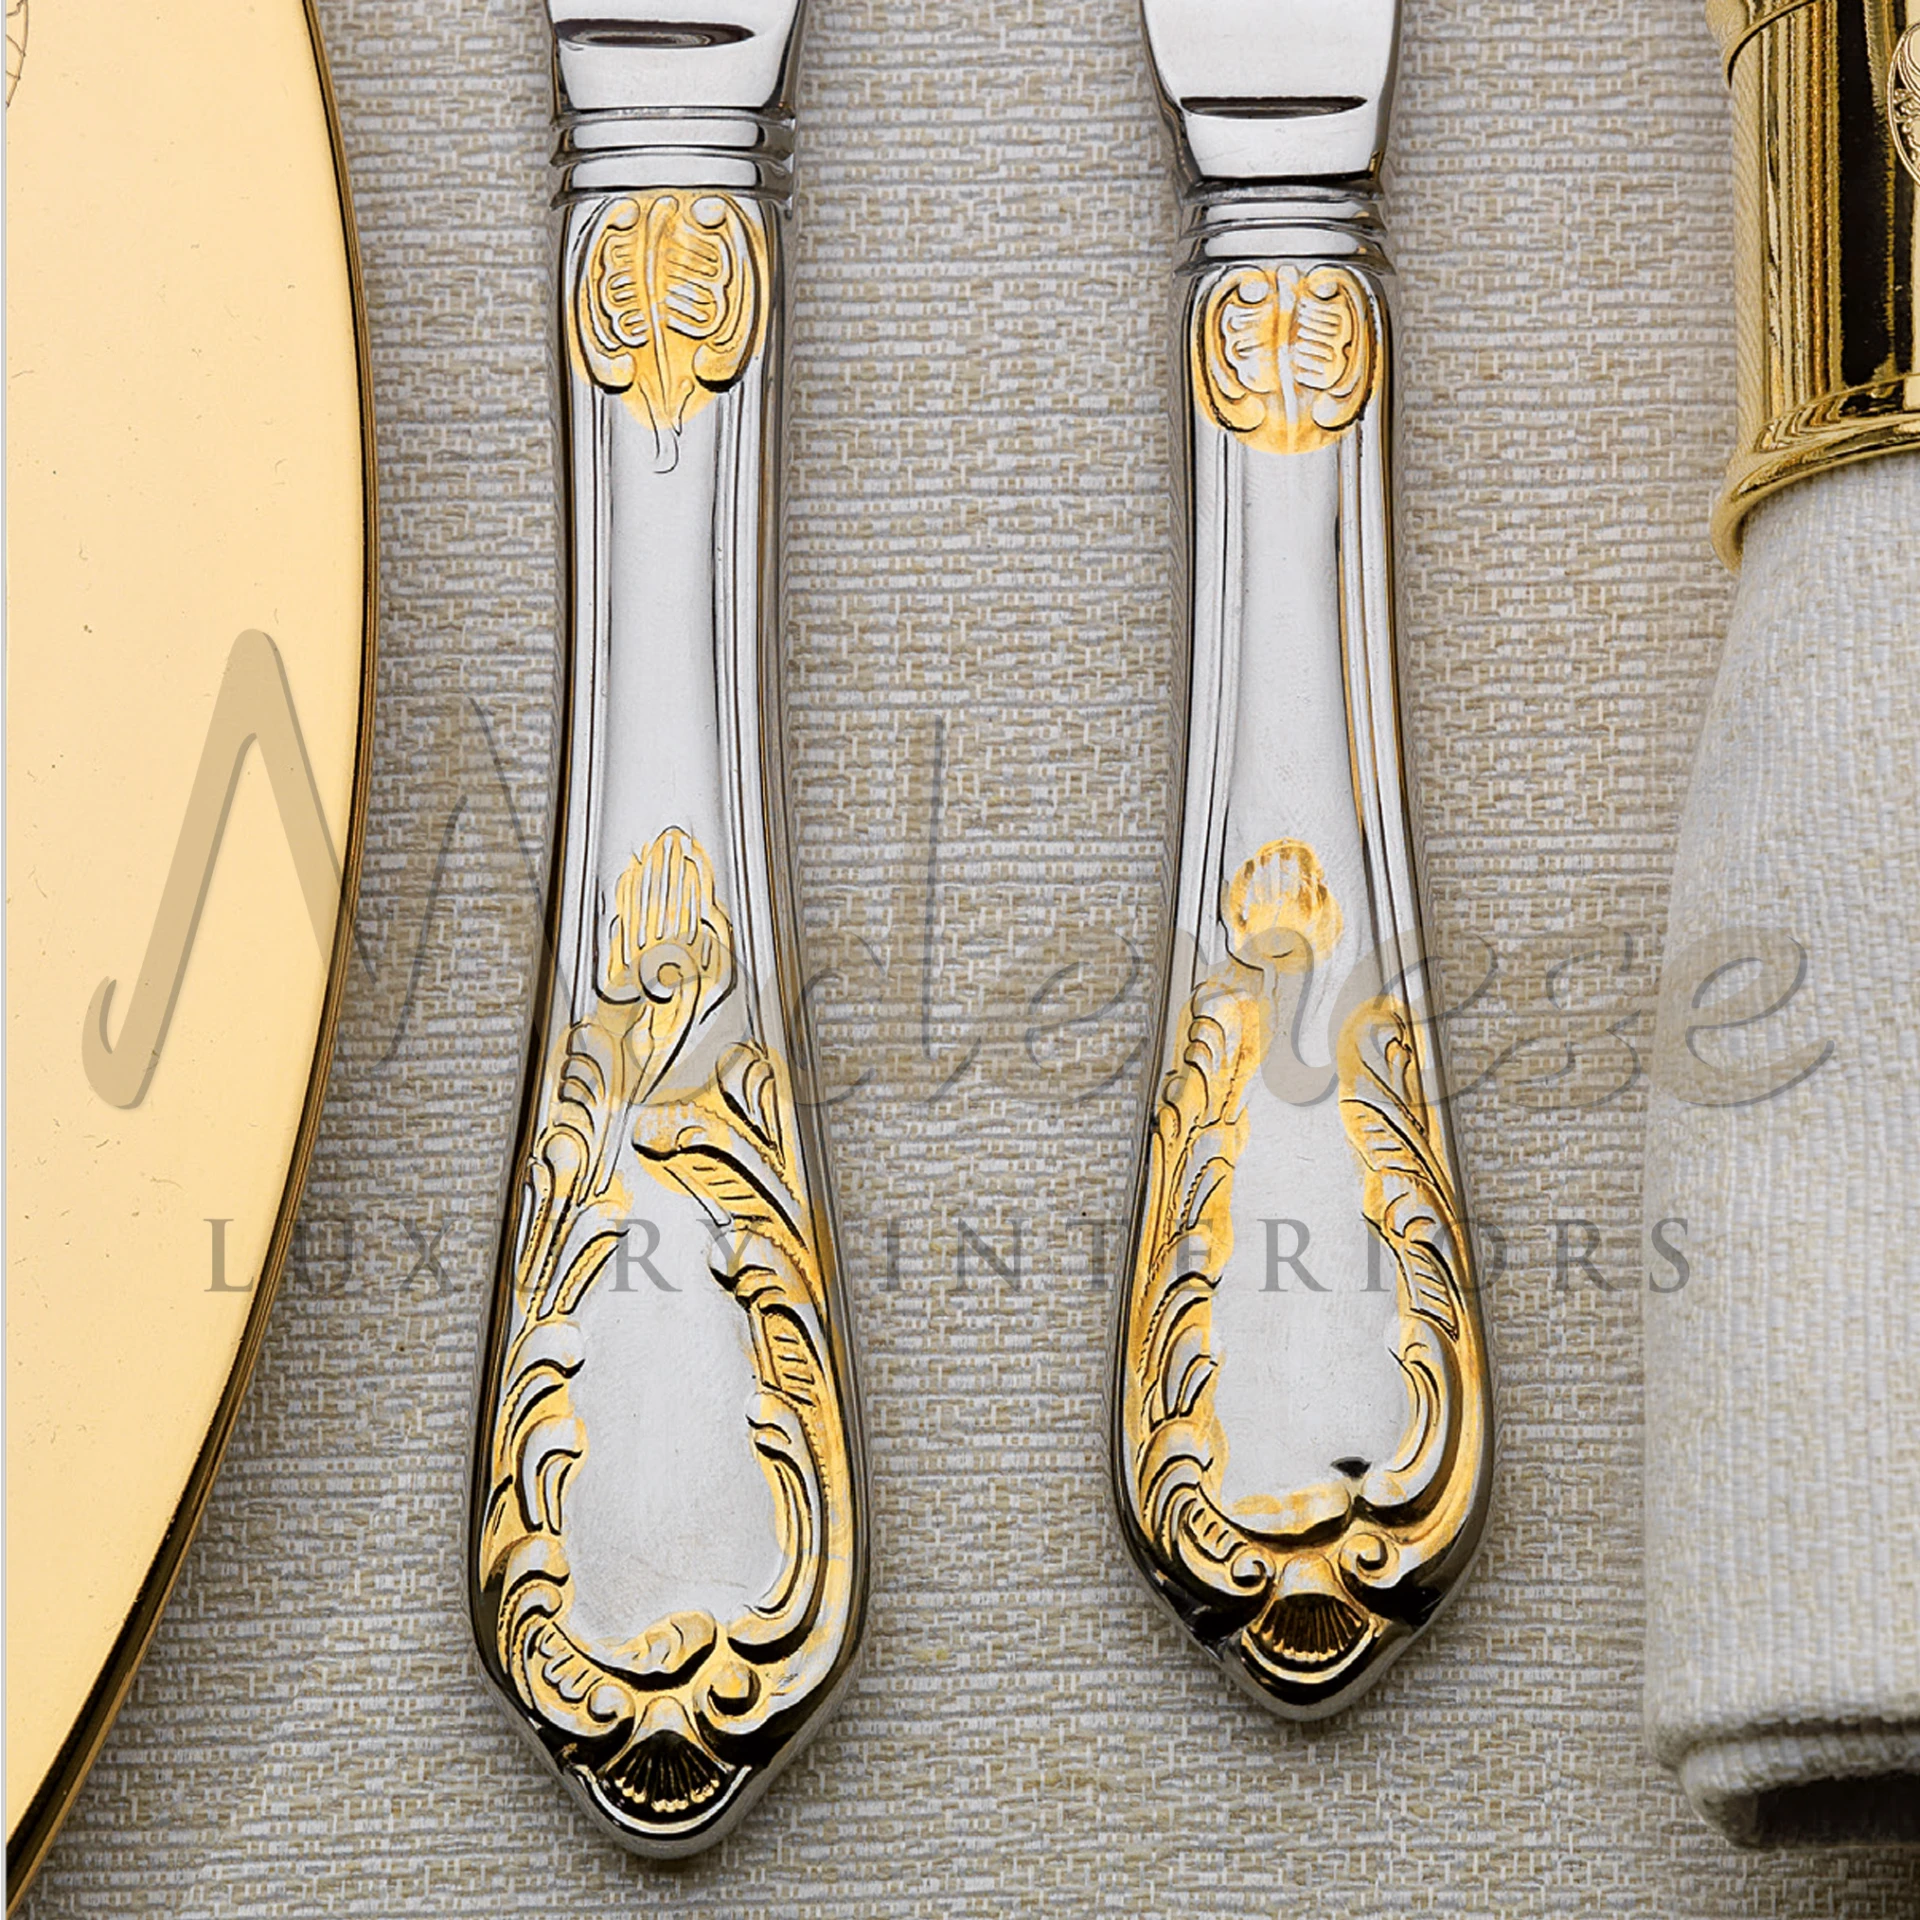 Close-up of silver cutlery handles with gold floral accents on a textured tablecloth